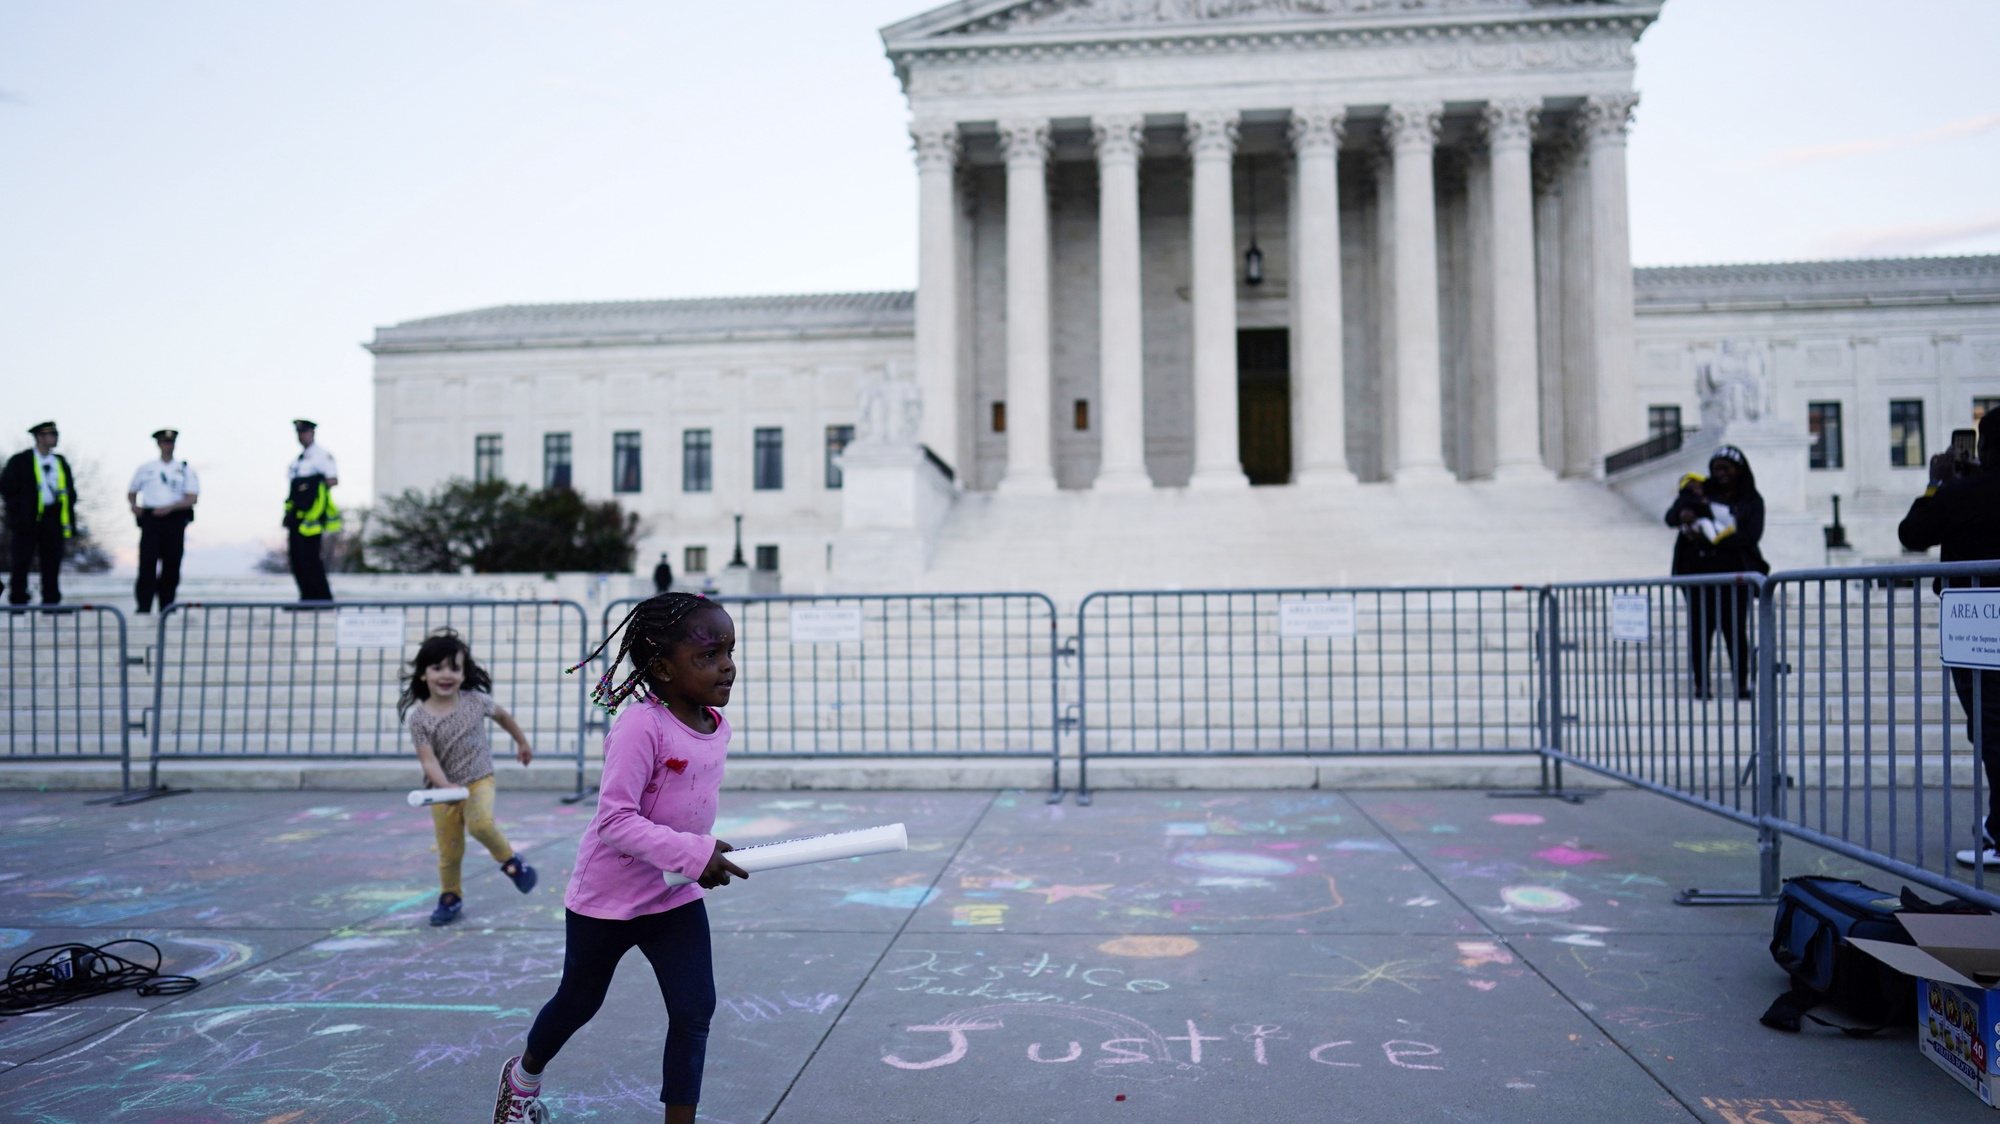 epa09879610 A young child plays as people celebrate the historic Senate confirmation of Judge Ketanji Brown Jackson to be an Associate Justice of the US Supreme Court at a rally outside the Supreme Court, in Washington DC, USA, 08 April 2022.  EPA/WILL OLIVER